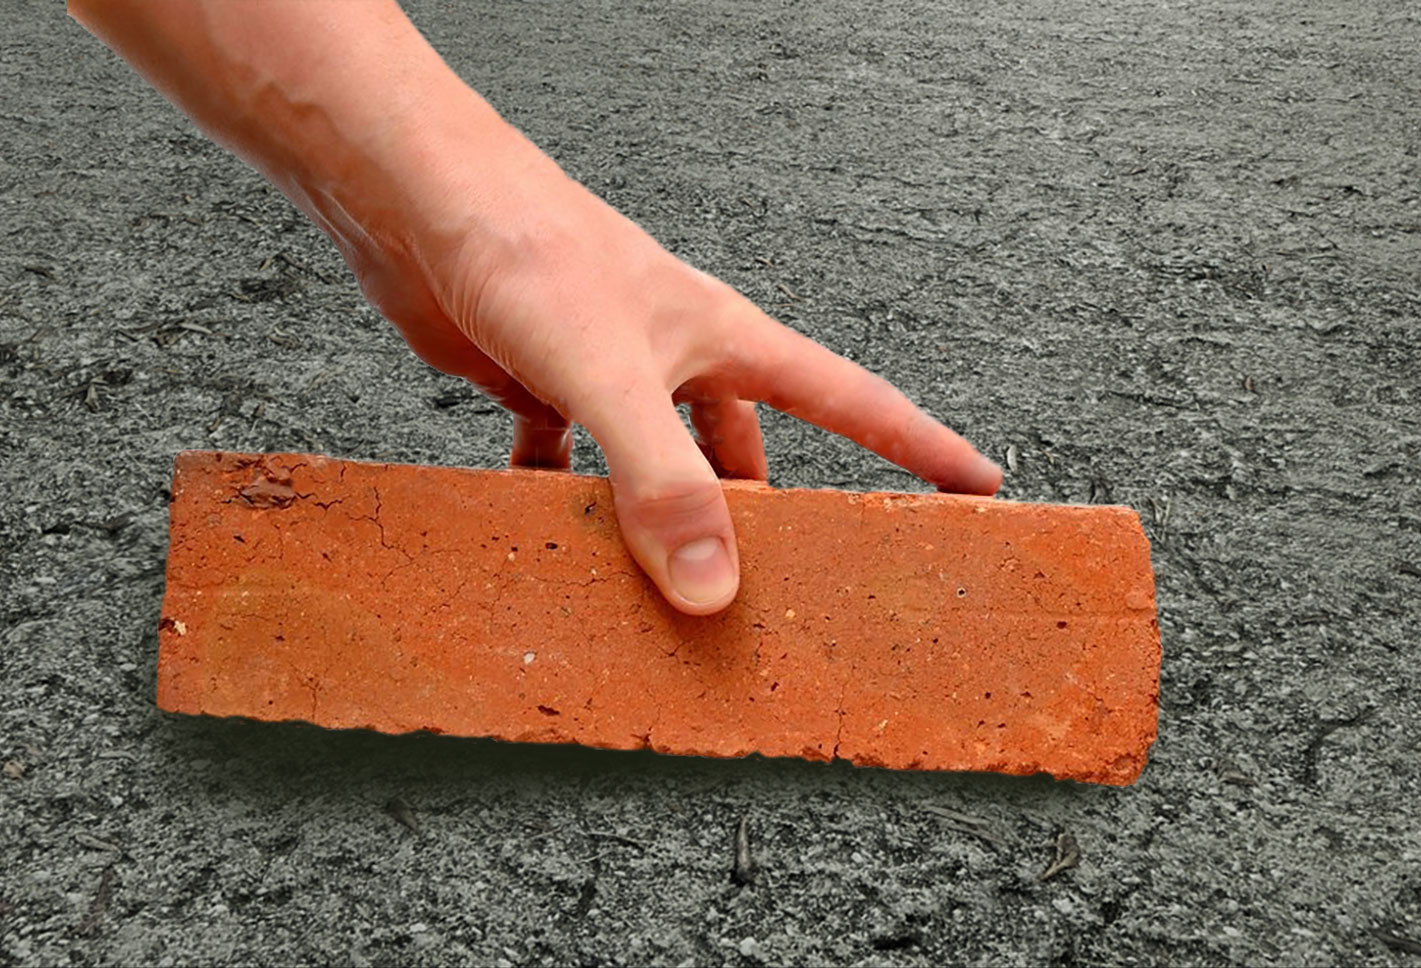 Brick being dragged on concrete